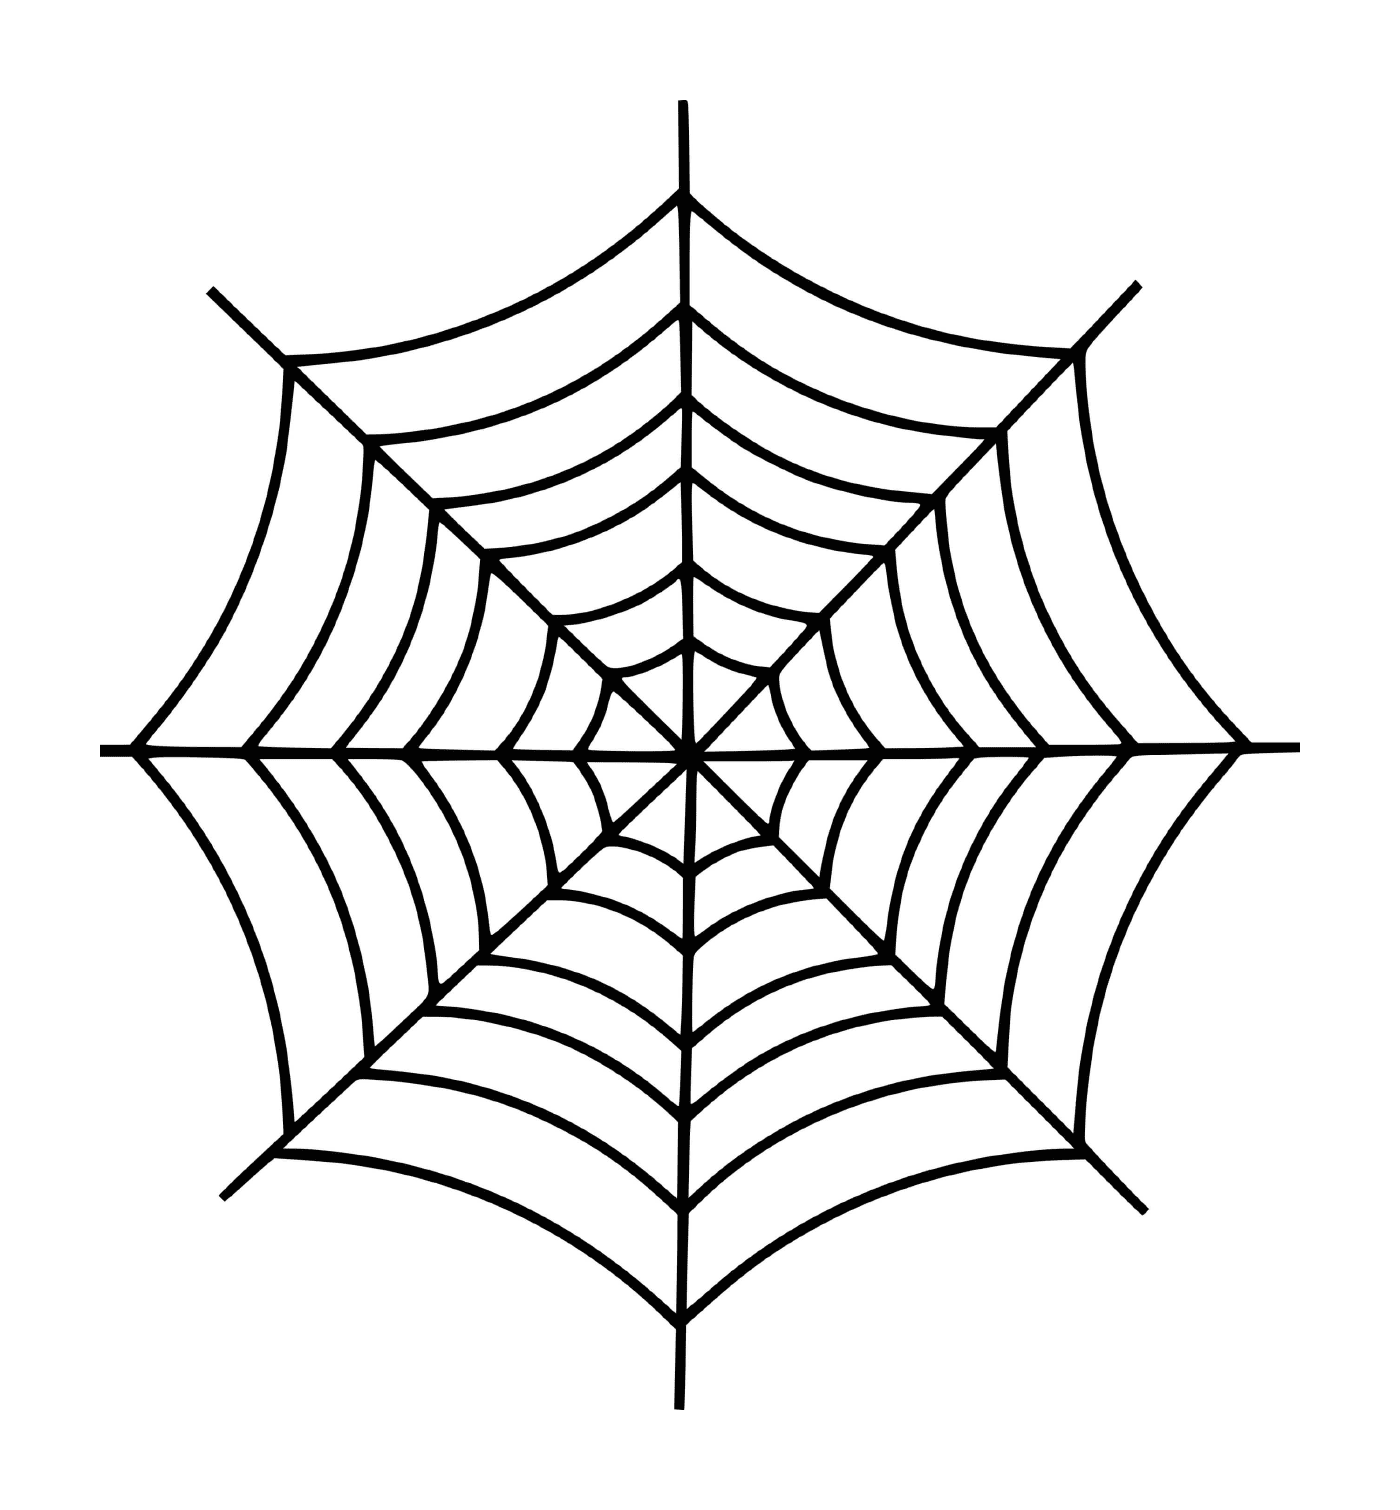  A simple spider web 